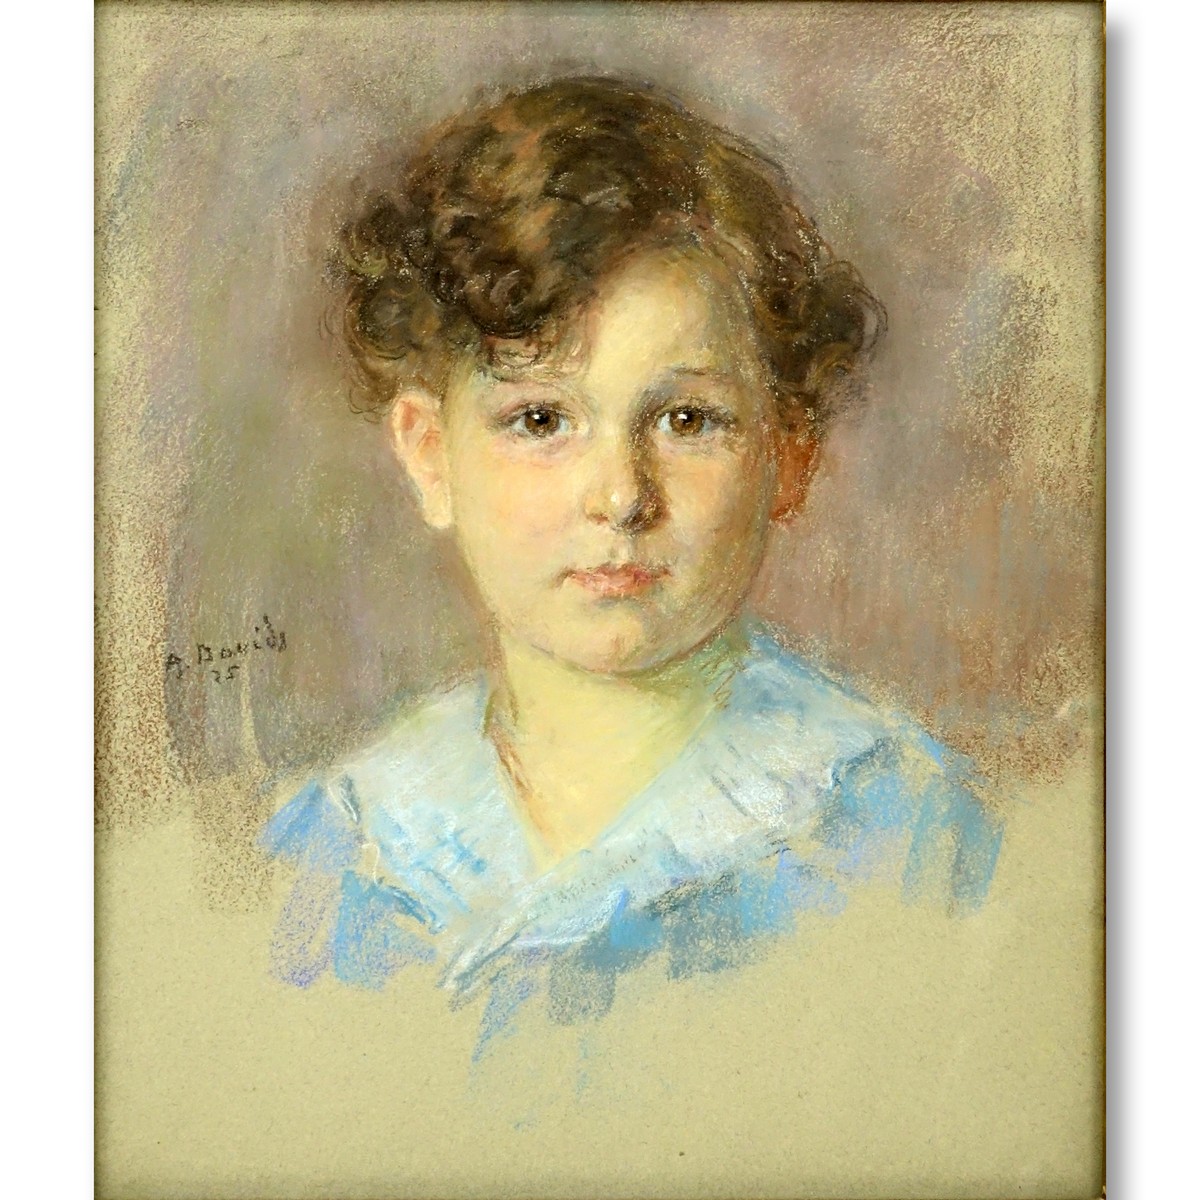 Antique Pastel On Paper "Portrait Of A Young Boy". Signed A.